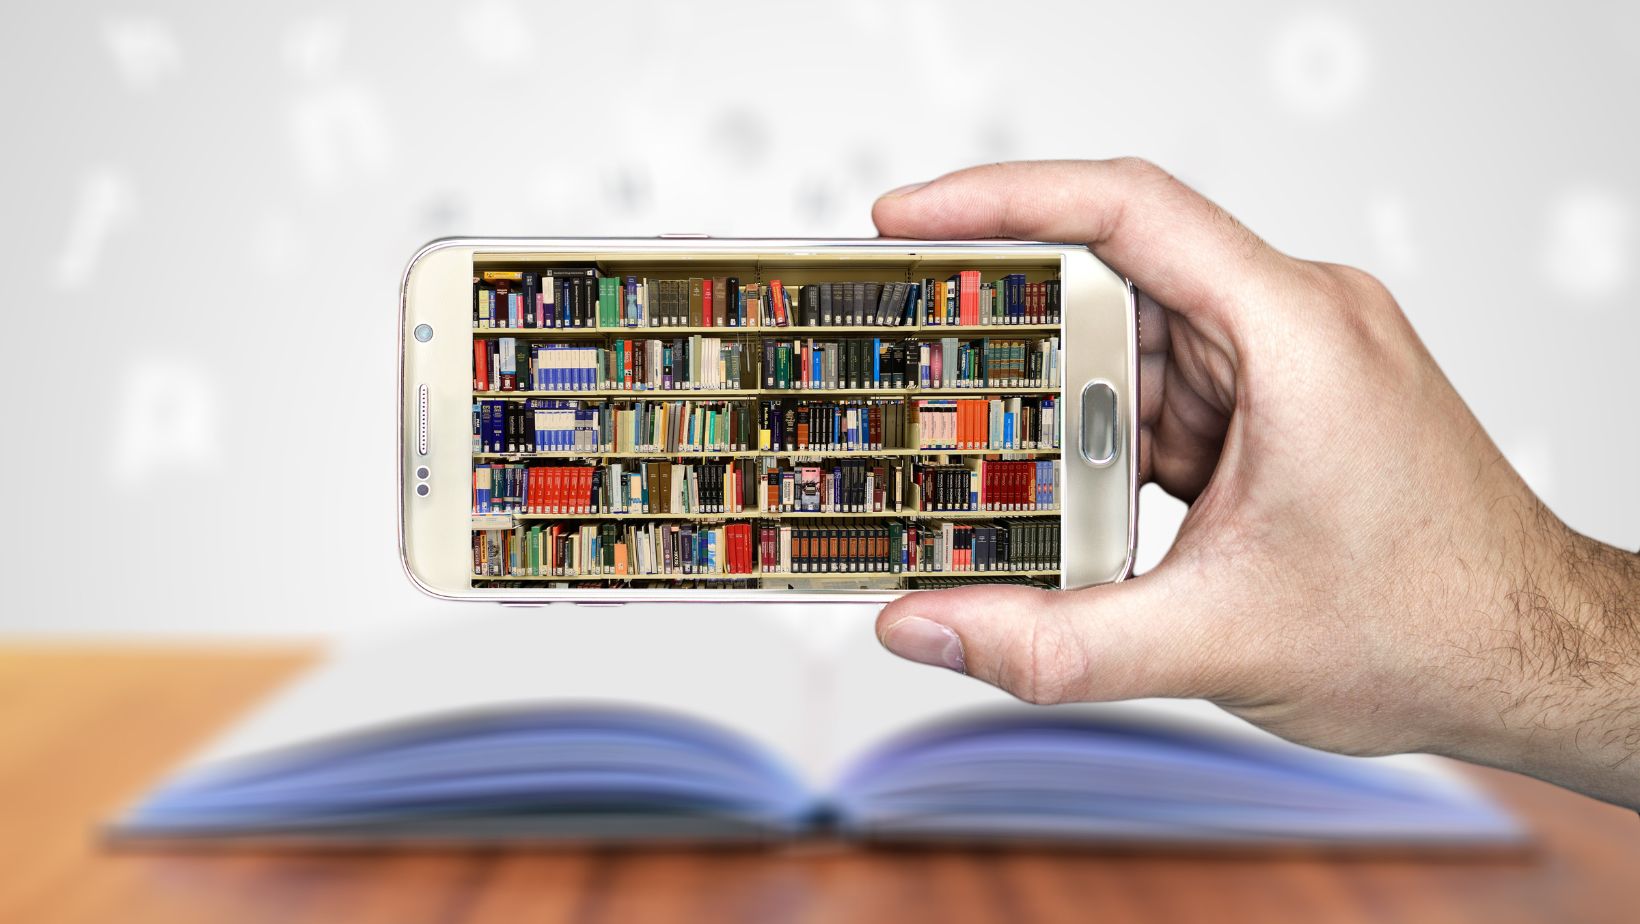 Z-Library: Shaping the Future of Digital Books